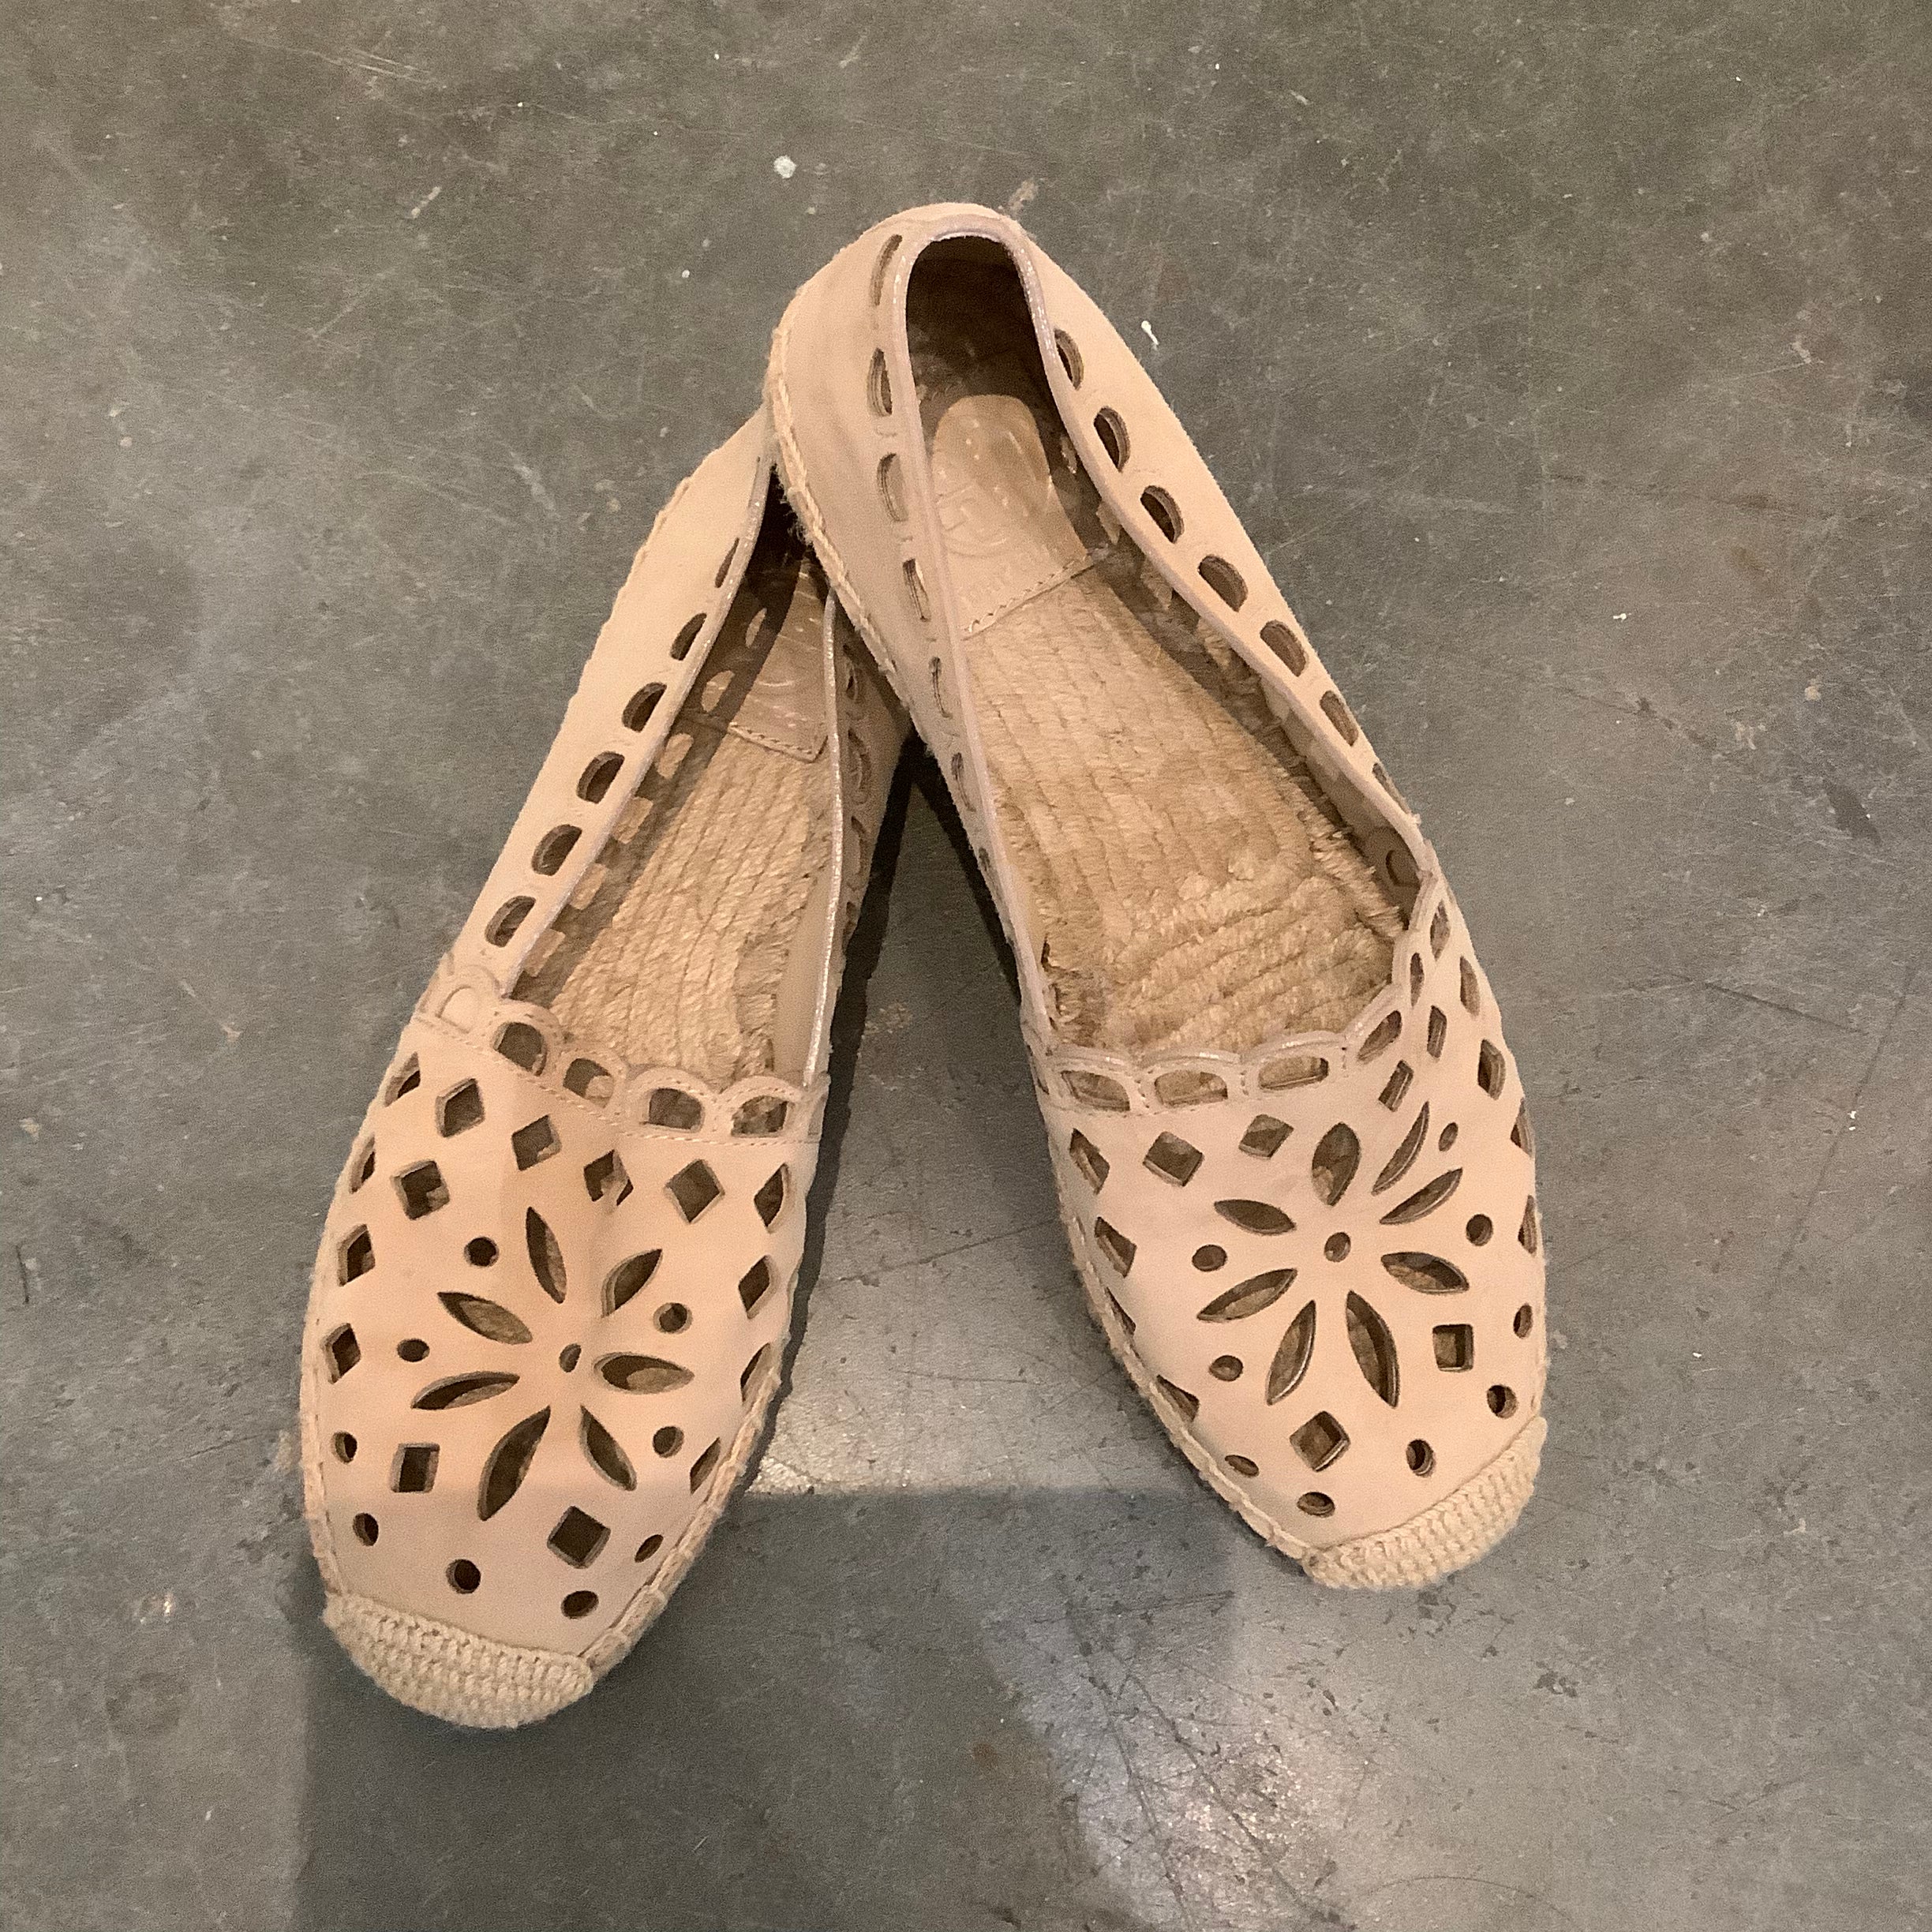 Tory Burch Beige Shoes Size 7.5